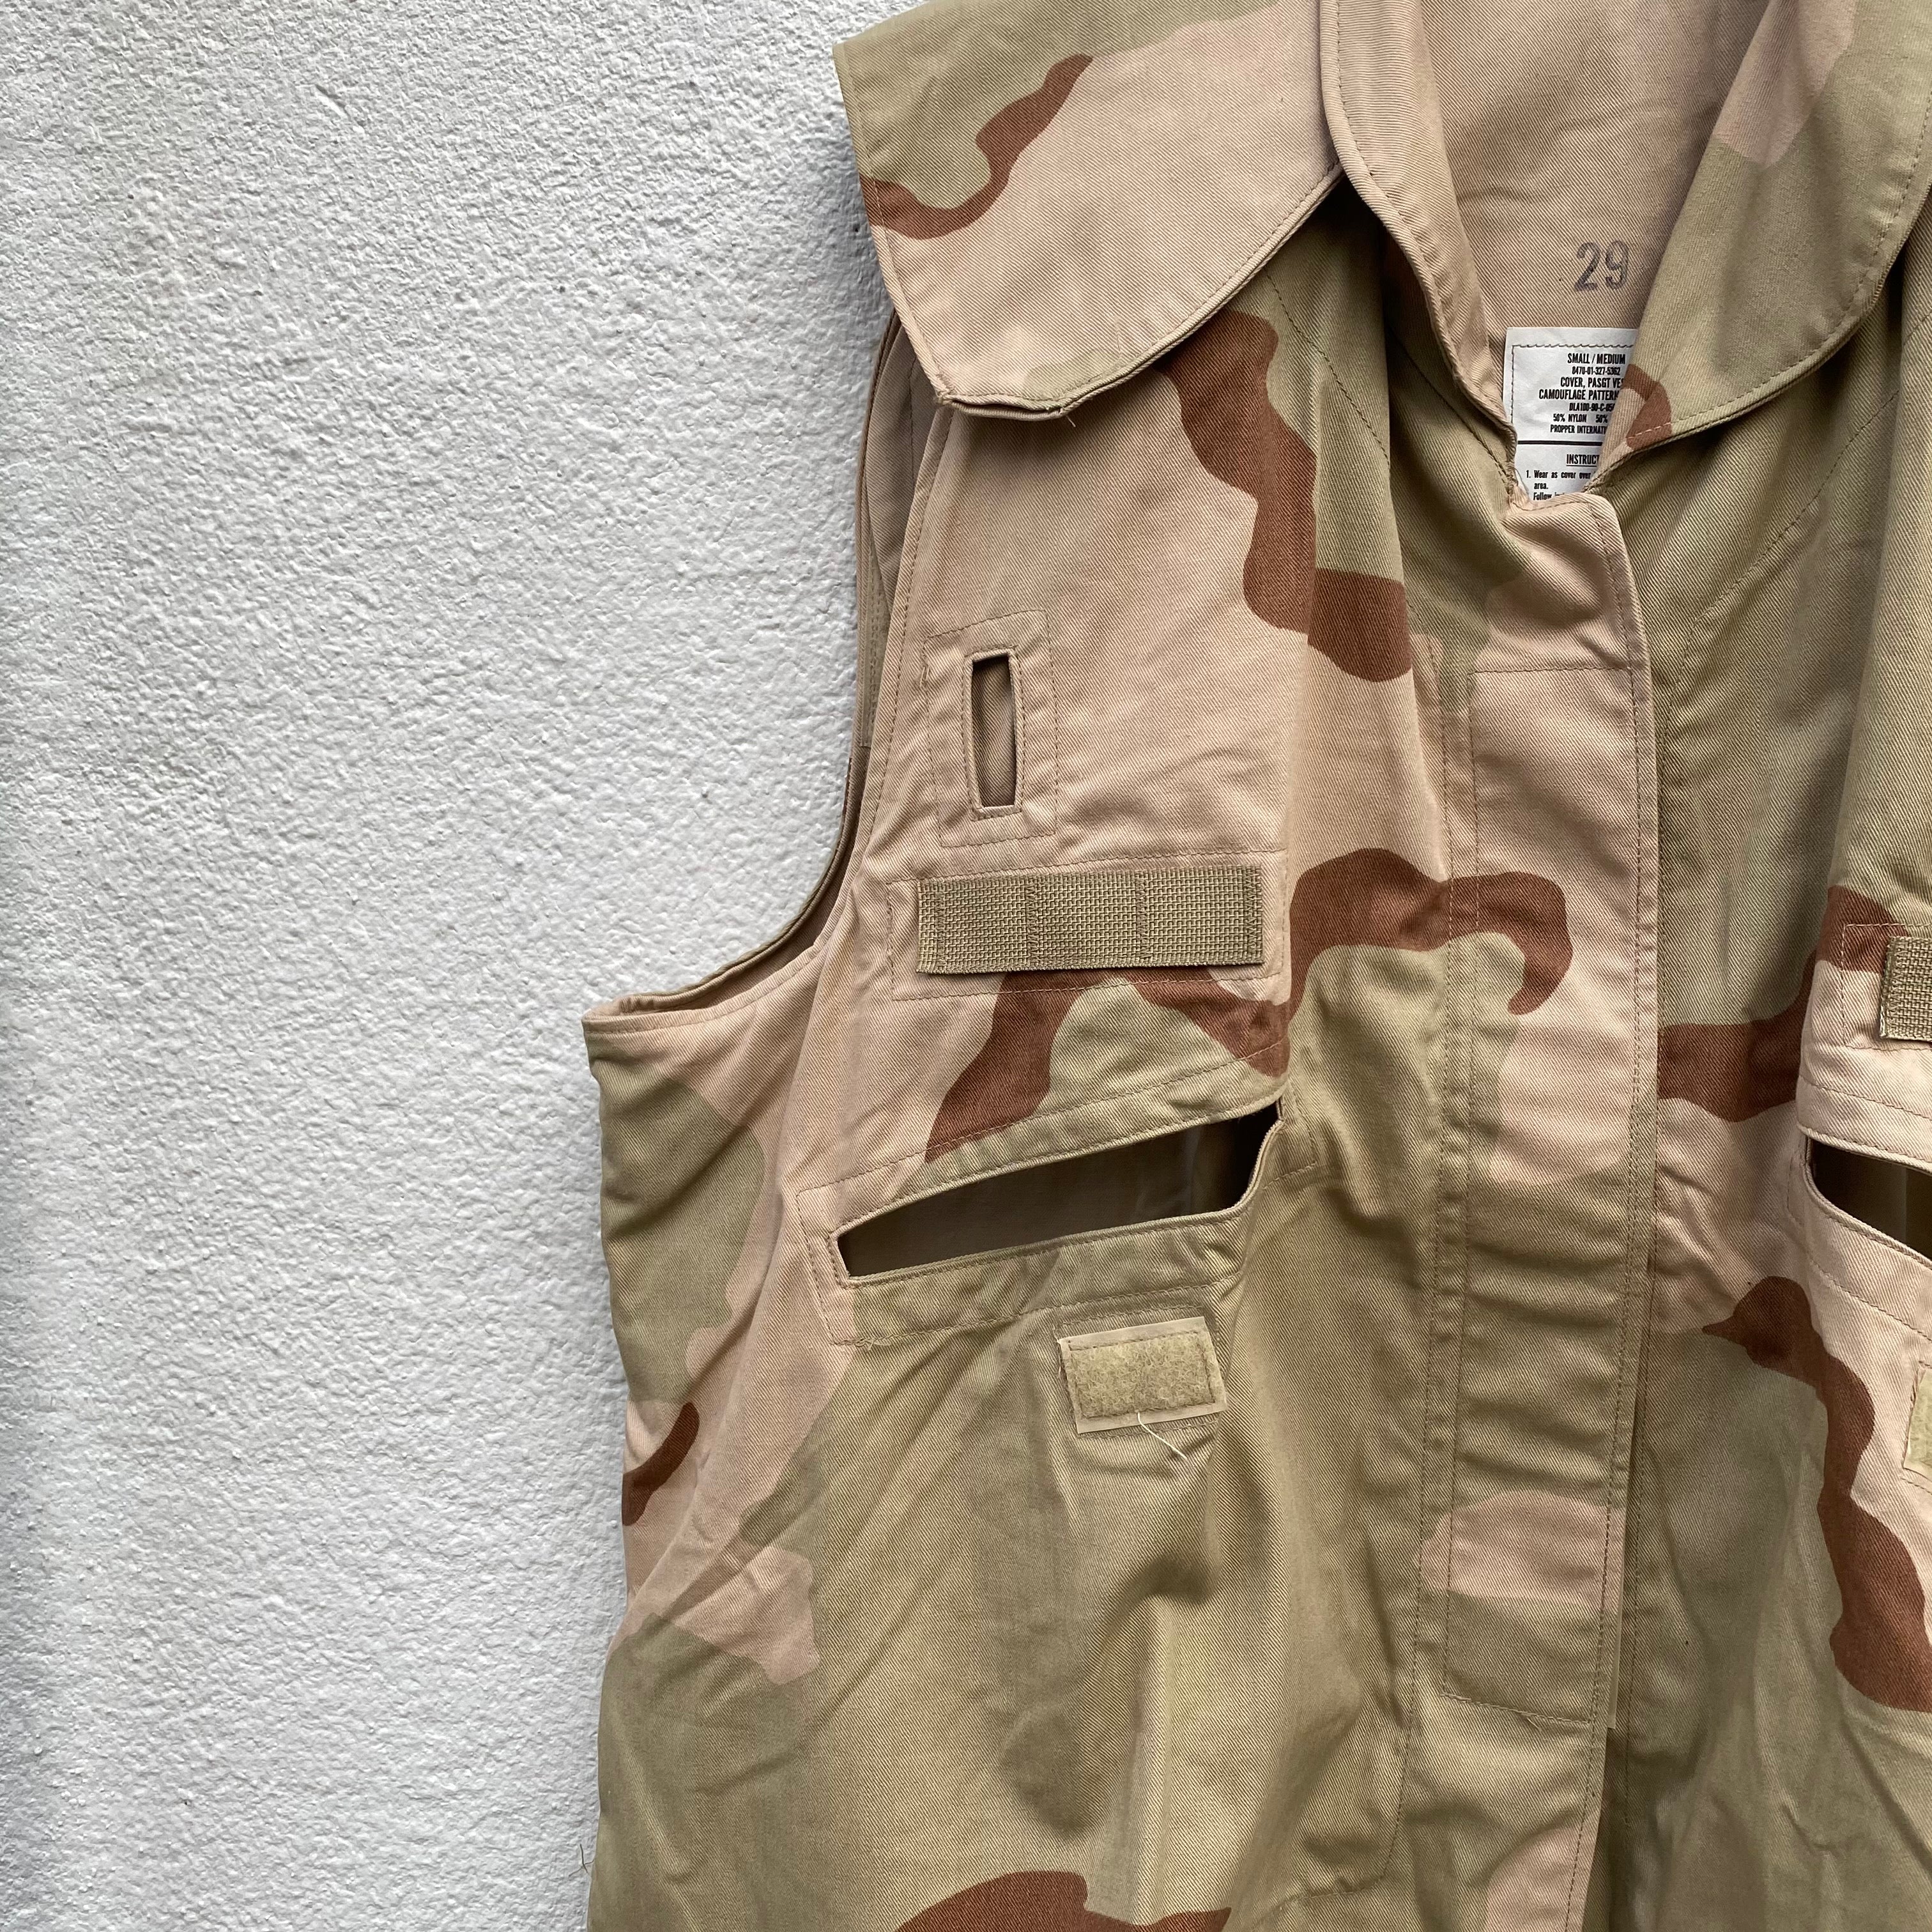 [ ONLY ONE ! ] 3COLOR DESERT BODY ARMOR VEST COVER / U.S. MILITARY